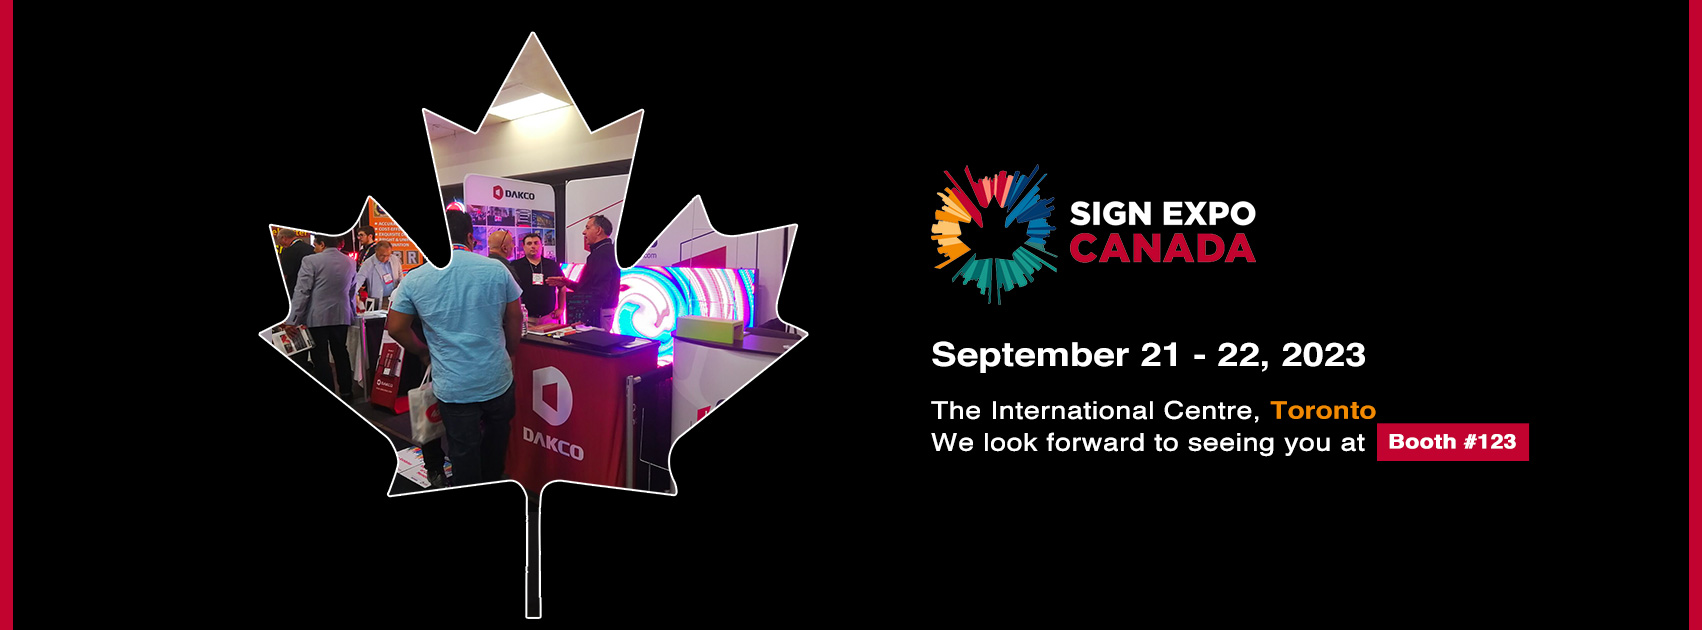 Meet Us at Booth #123, Sign Expo Canada 2023